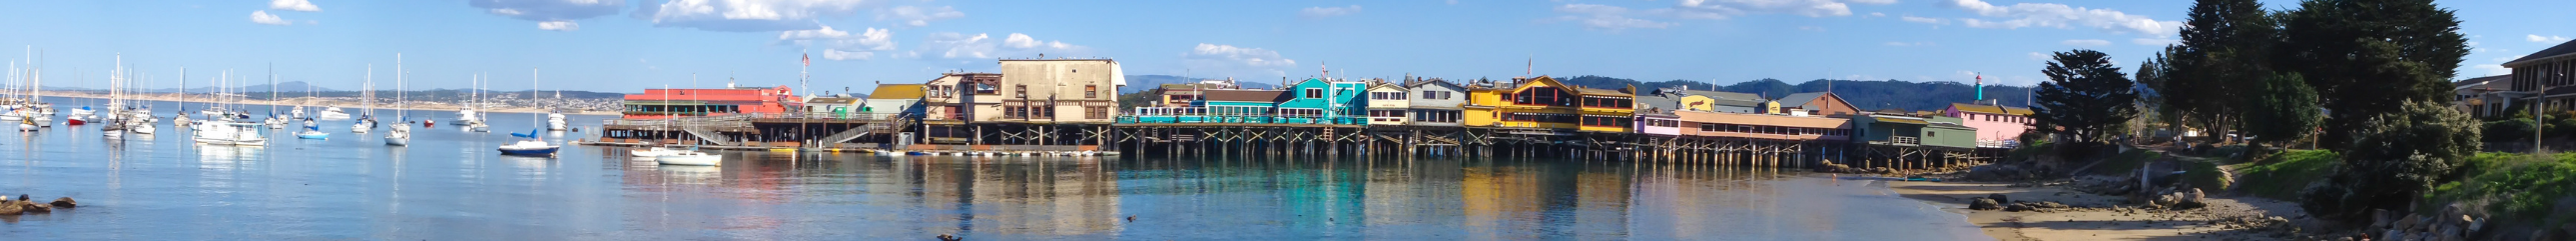 Bay with colorful houses on a warf